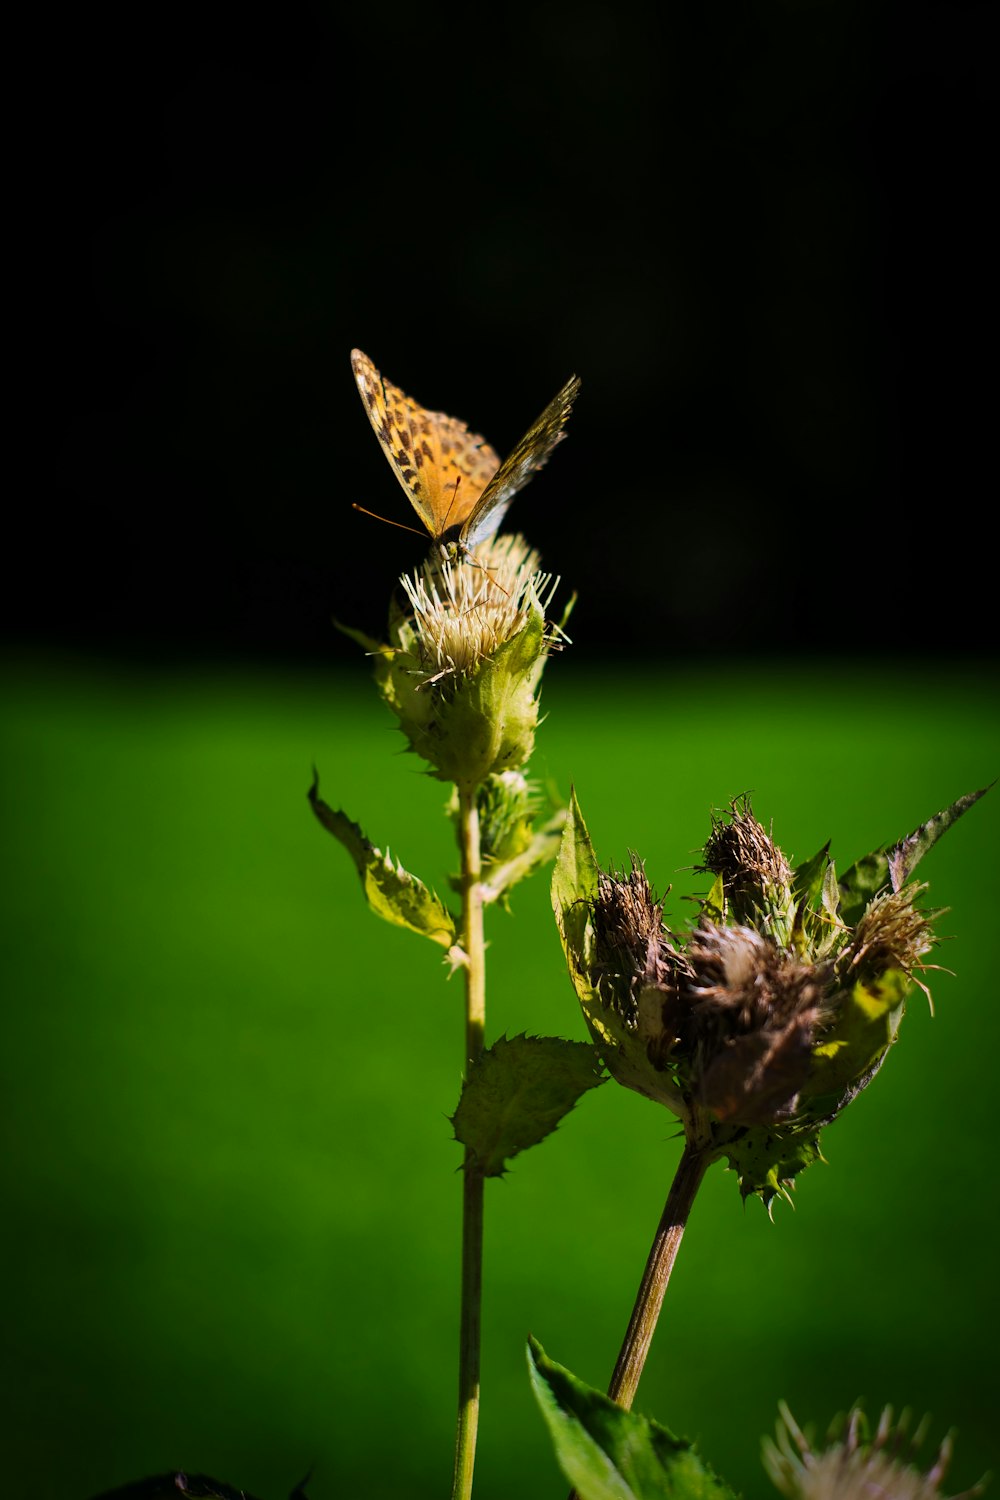 brown butterfly perched on green plant during daytime